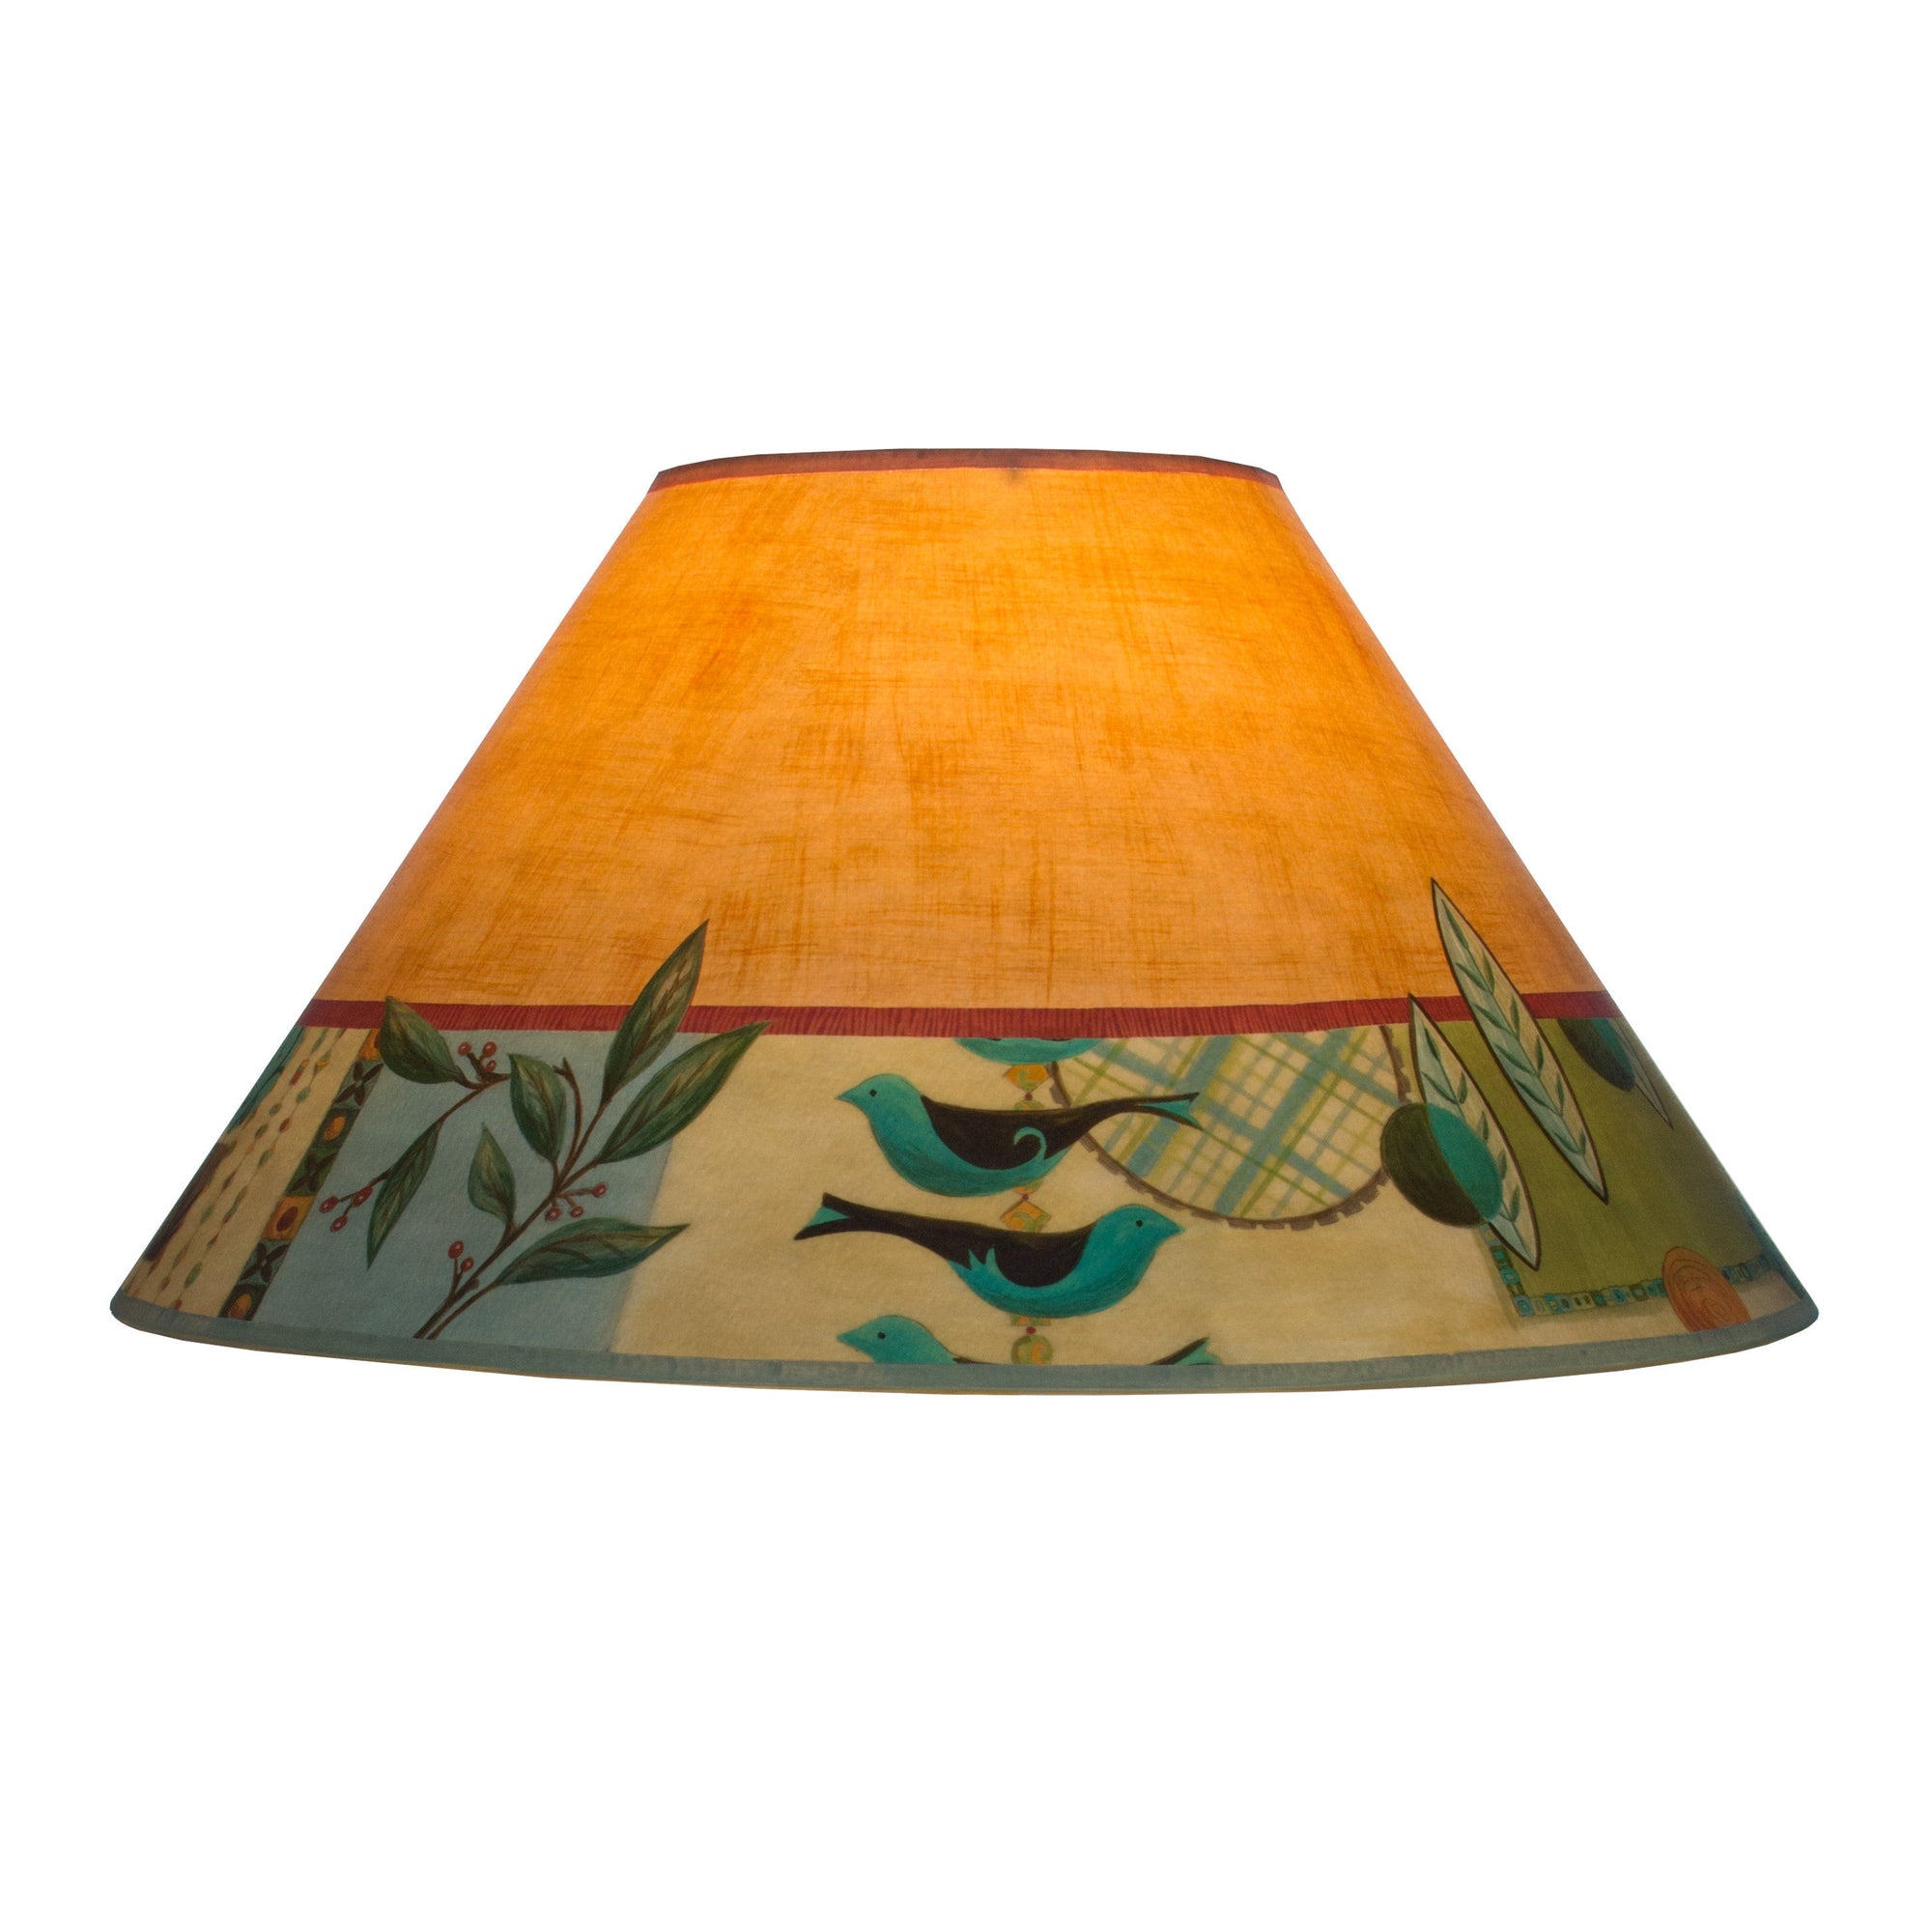 Janna Ugone & Co Lamp Shades Large Conical Lamp Shade in New Capri Spice